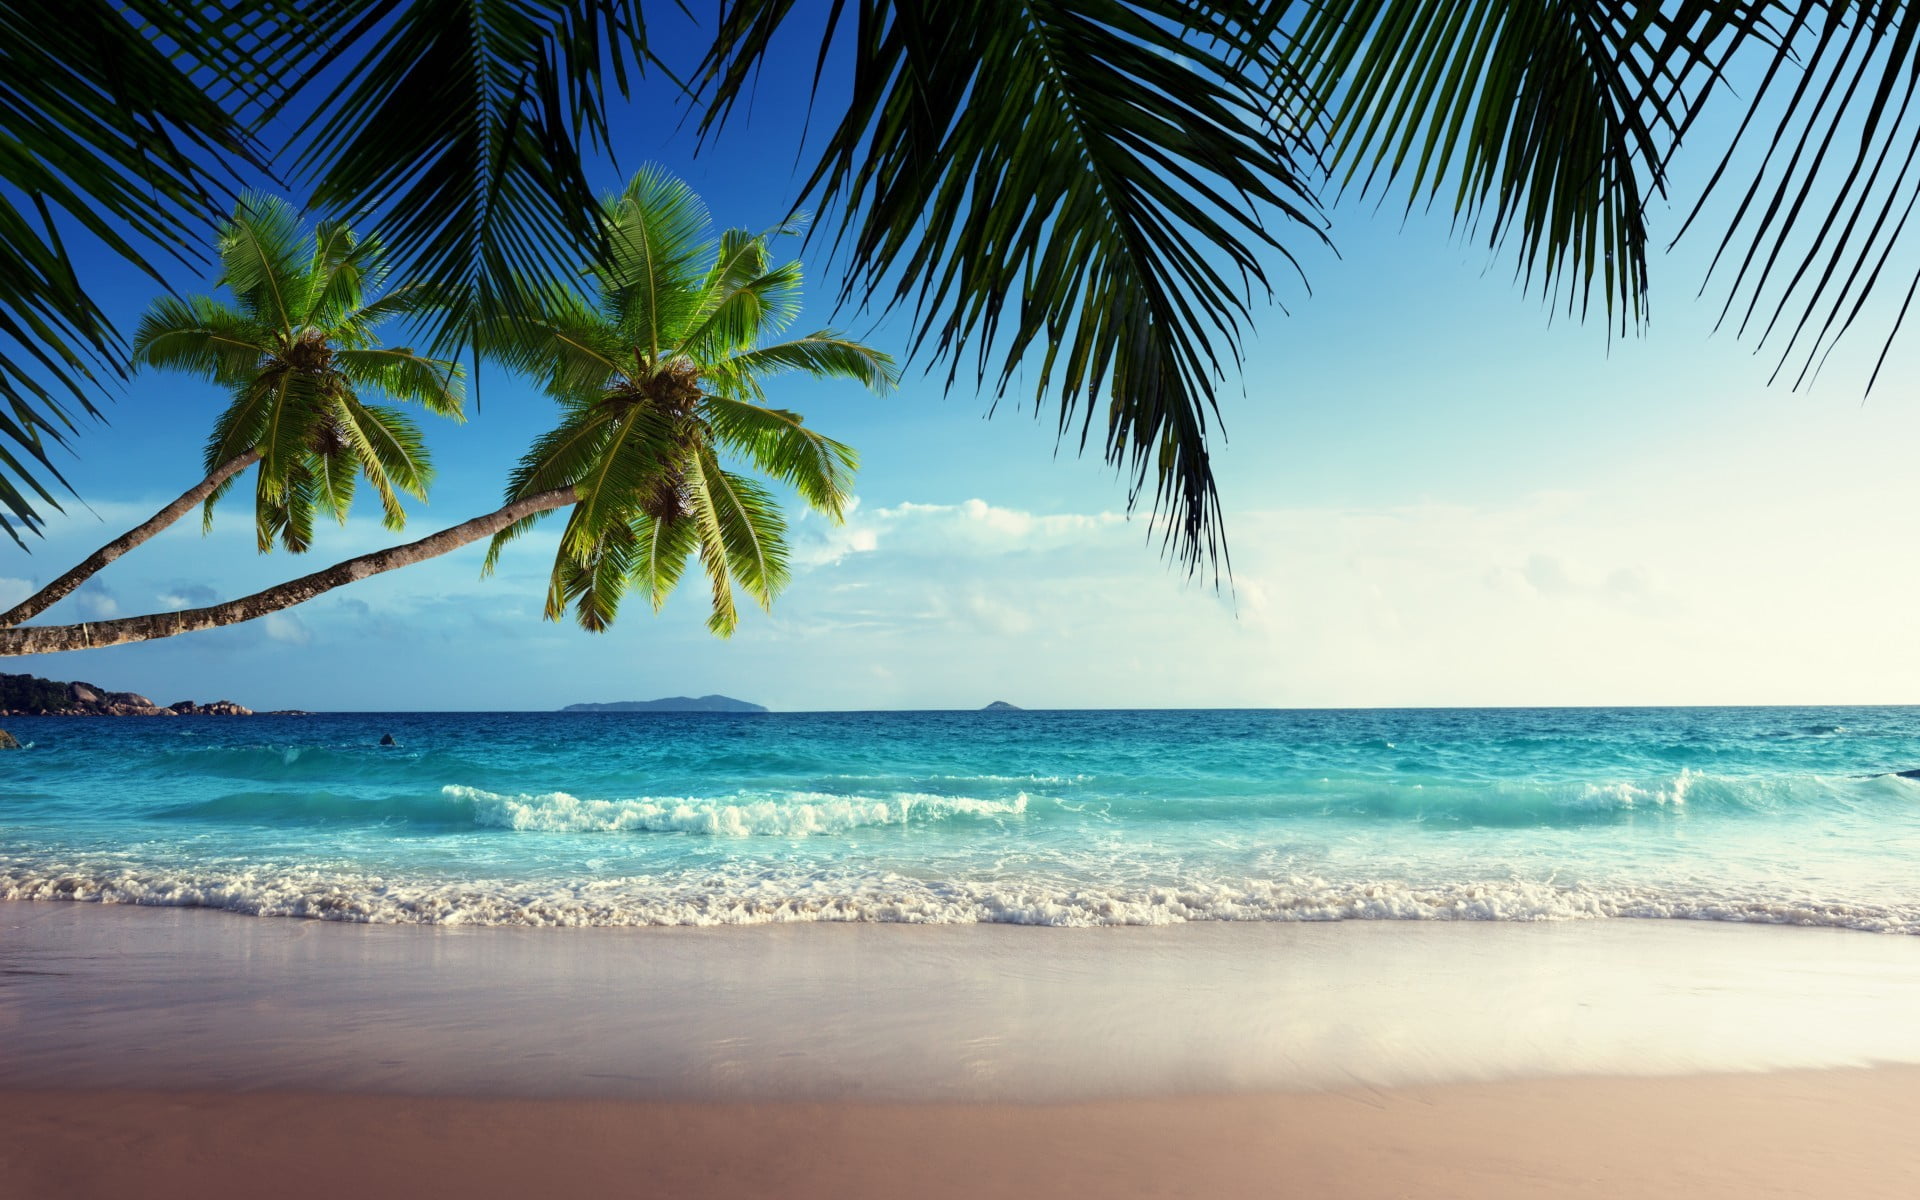 Online Crop Green Coconut Tress And Teal Sea Beach Sand Palm Trees